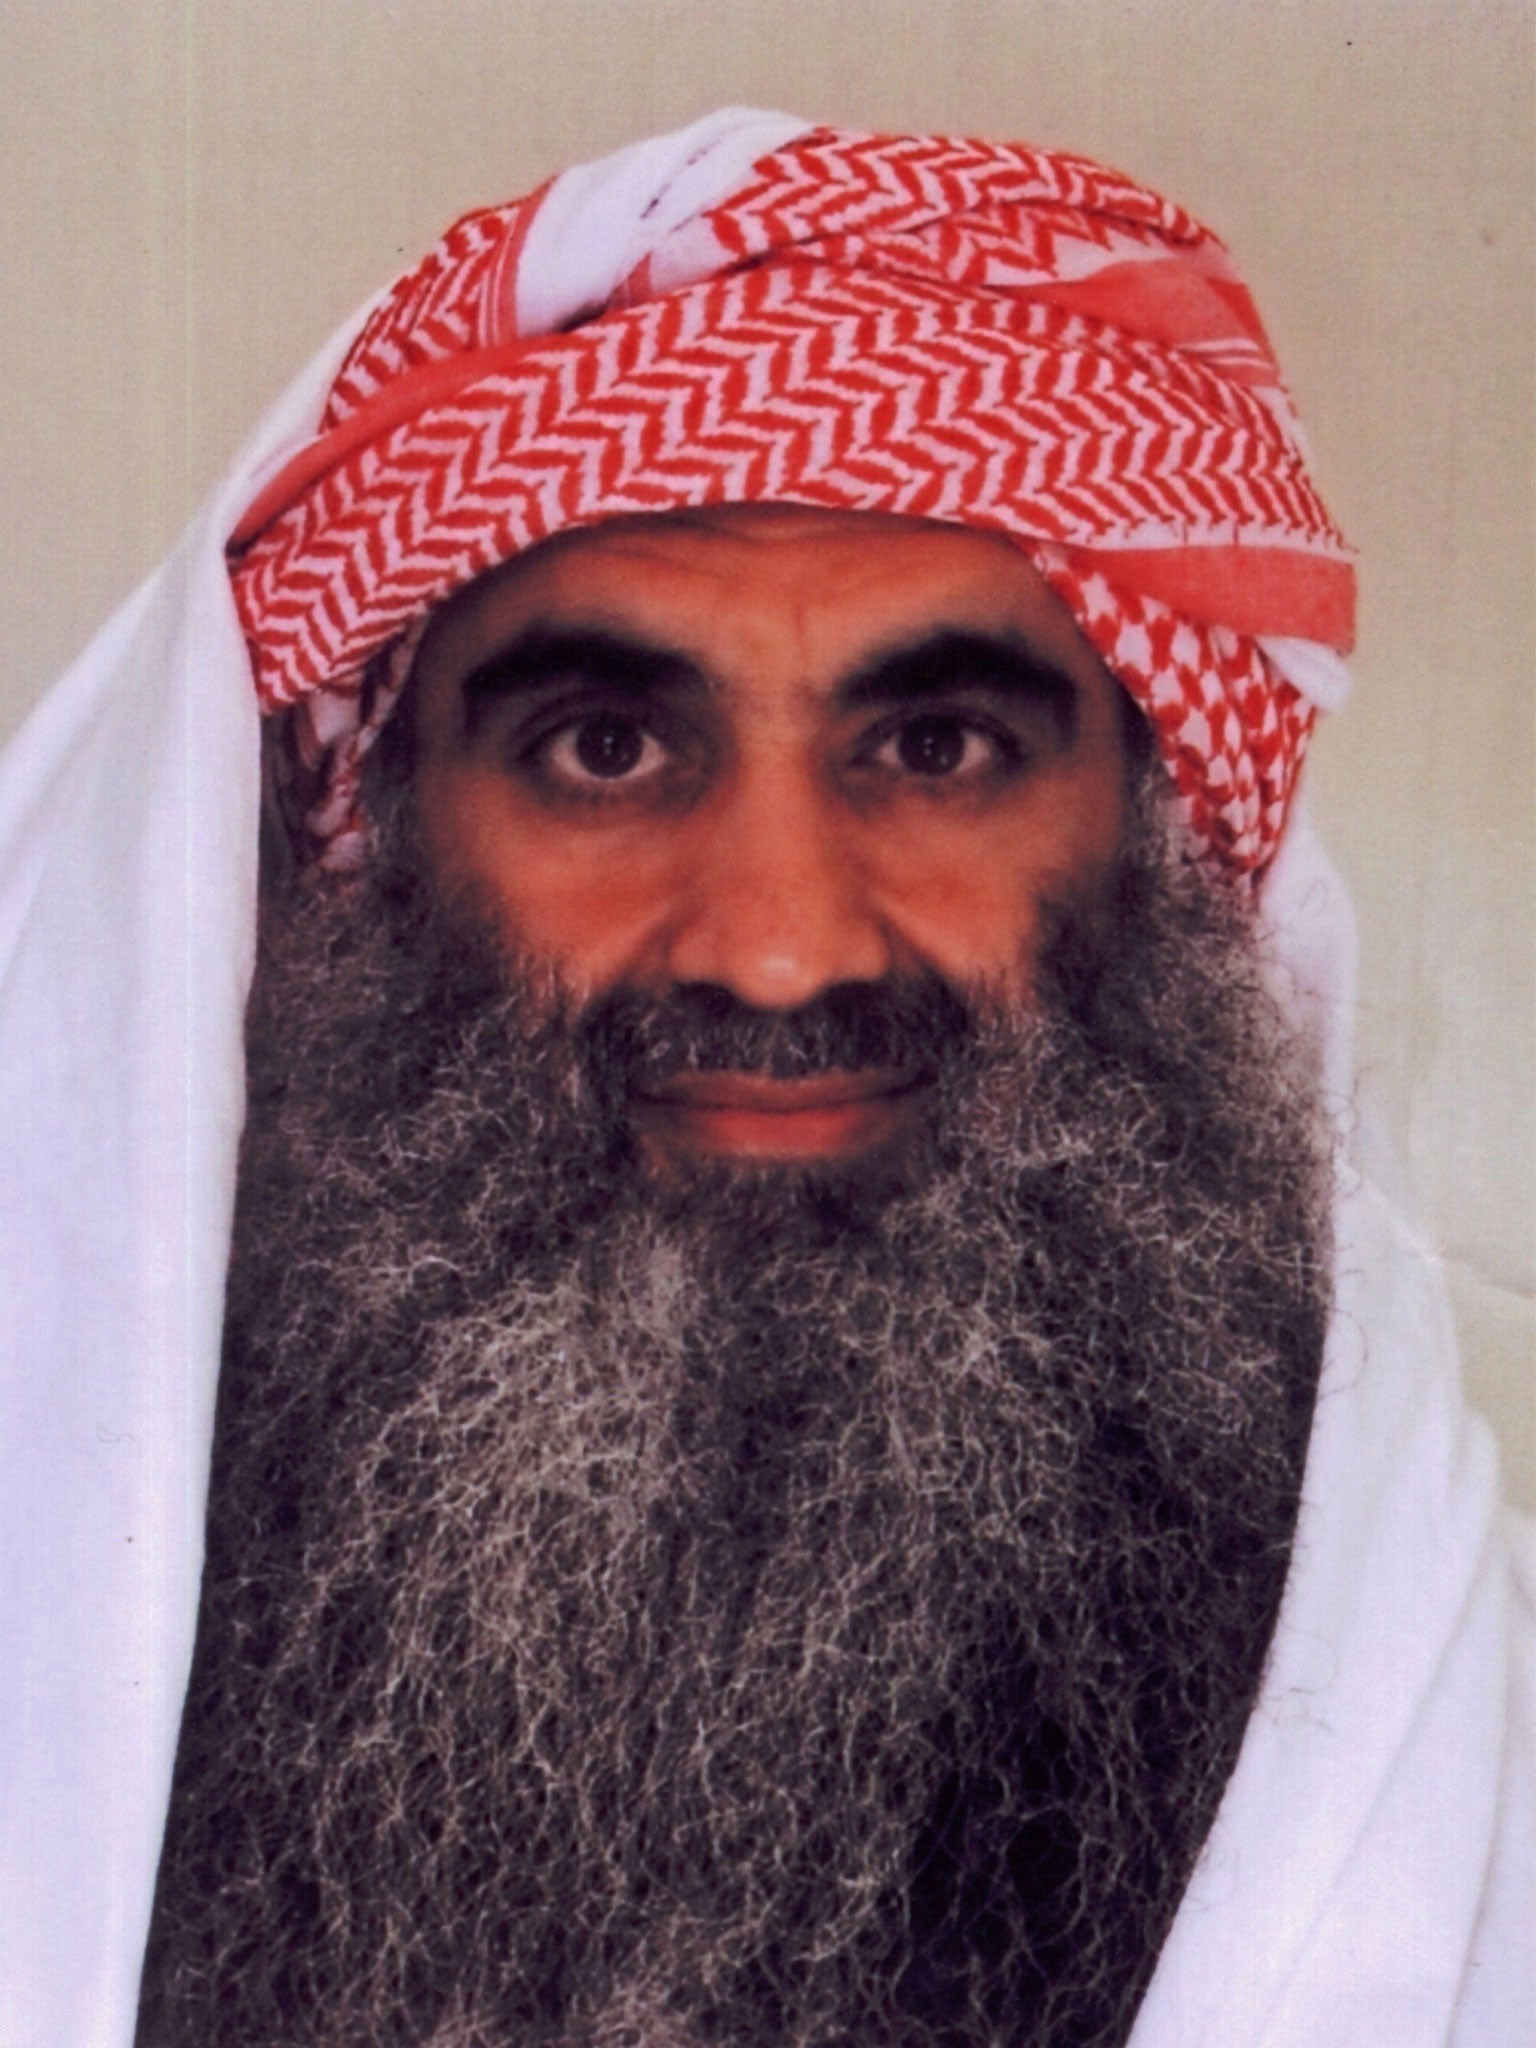 An insider has claimed that Khalid Sheikh Mohammed, allegedly the mastermind of the 9/11 attacks on the World Trade Centre and Pentagon, were brought to the 'point of death' by CIA officials following the 9/11 attacks